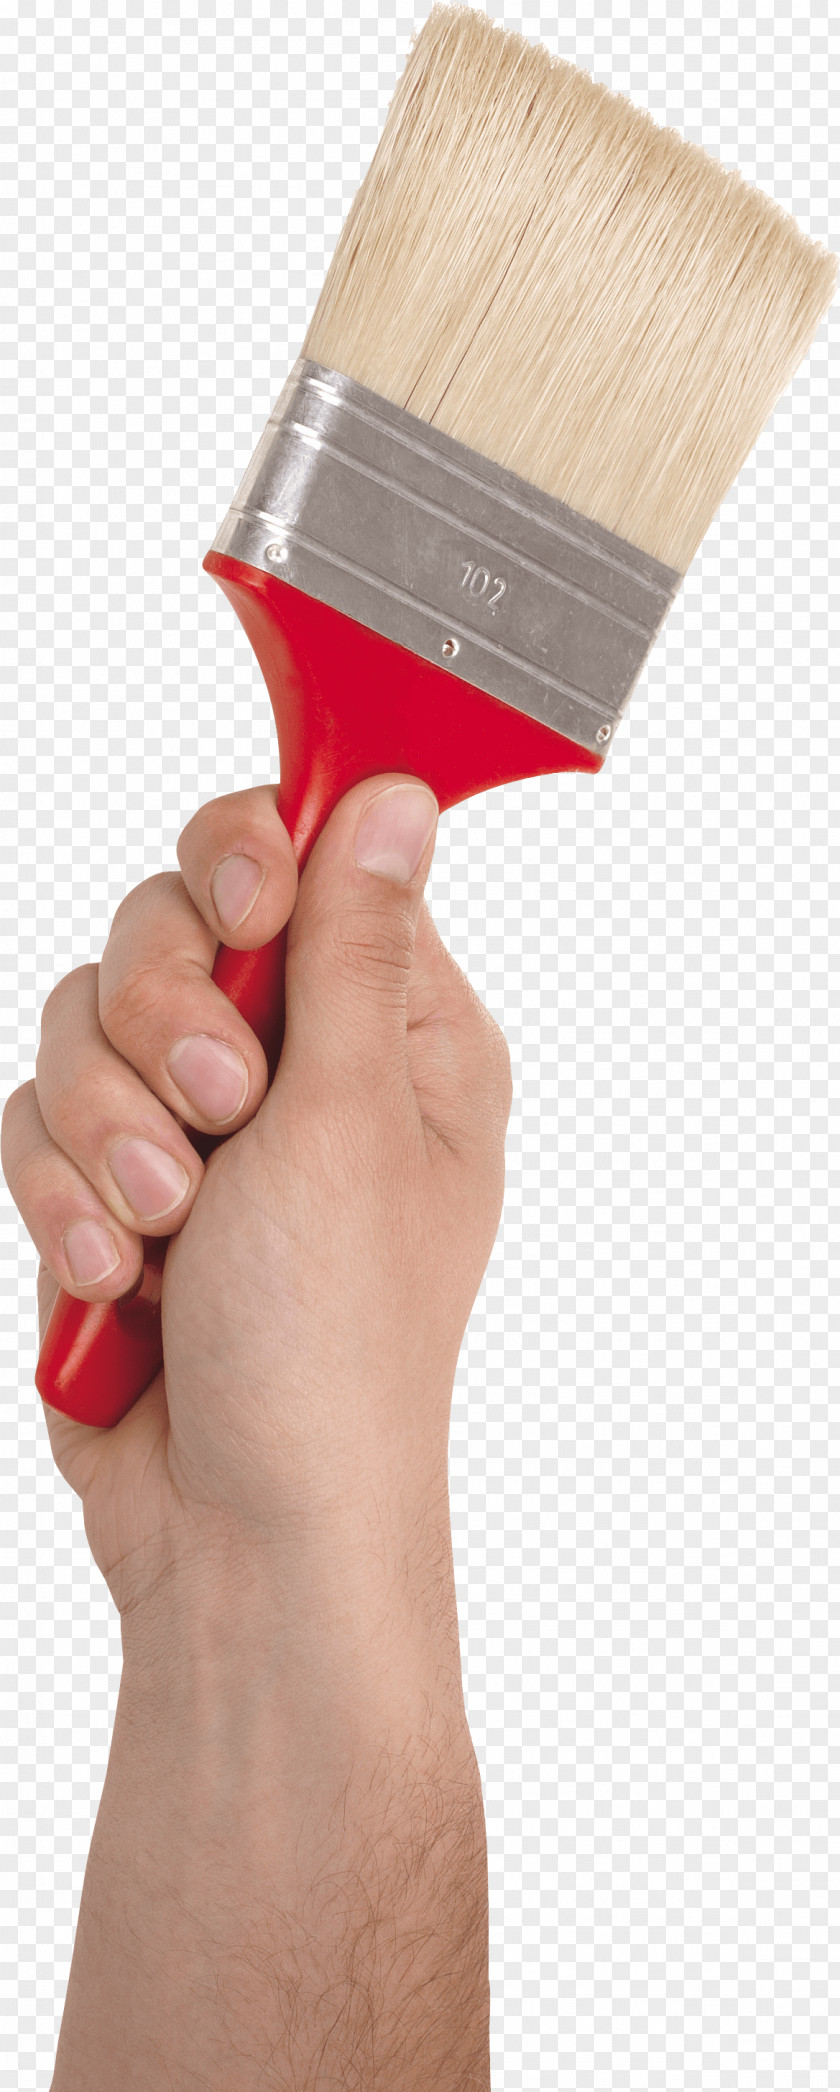 Paint Brush In Hand Image PNG